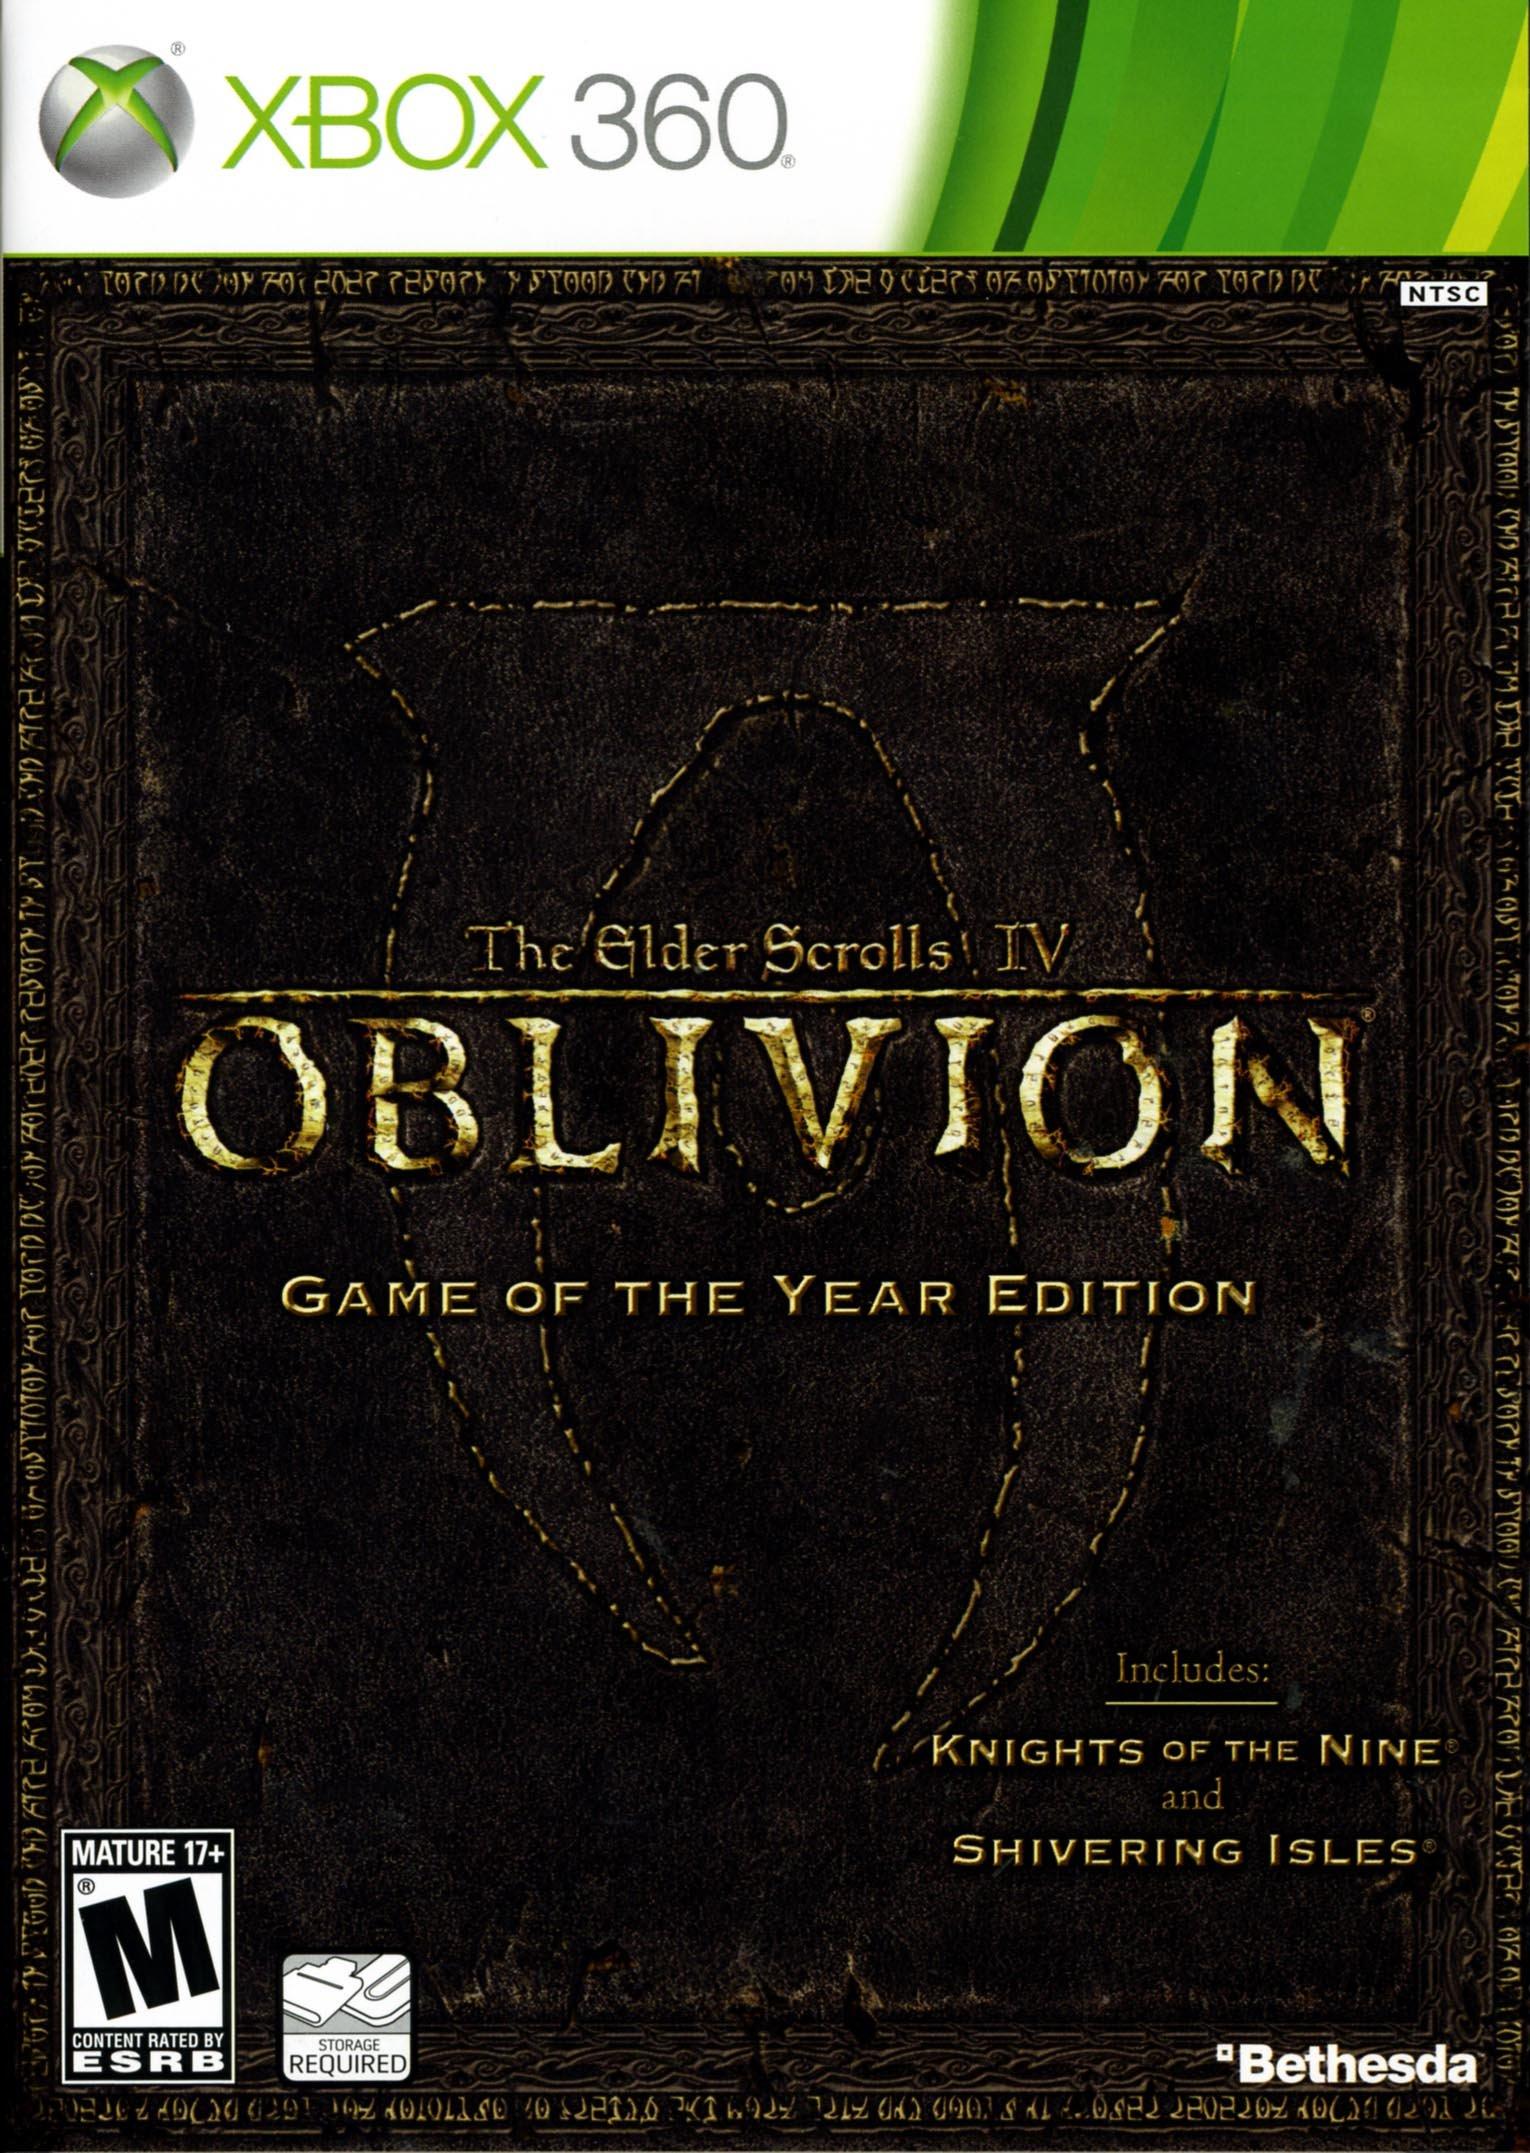 the-elder-scrolls-iv-oblivion-game-of-the-year-edition-xbox-360